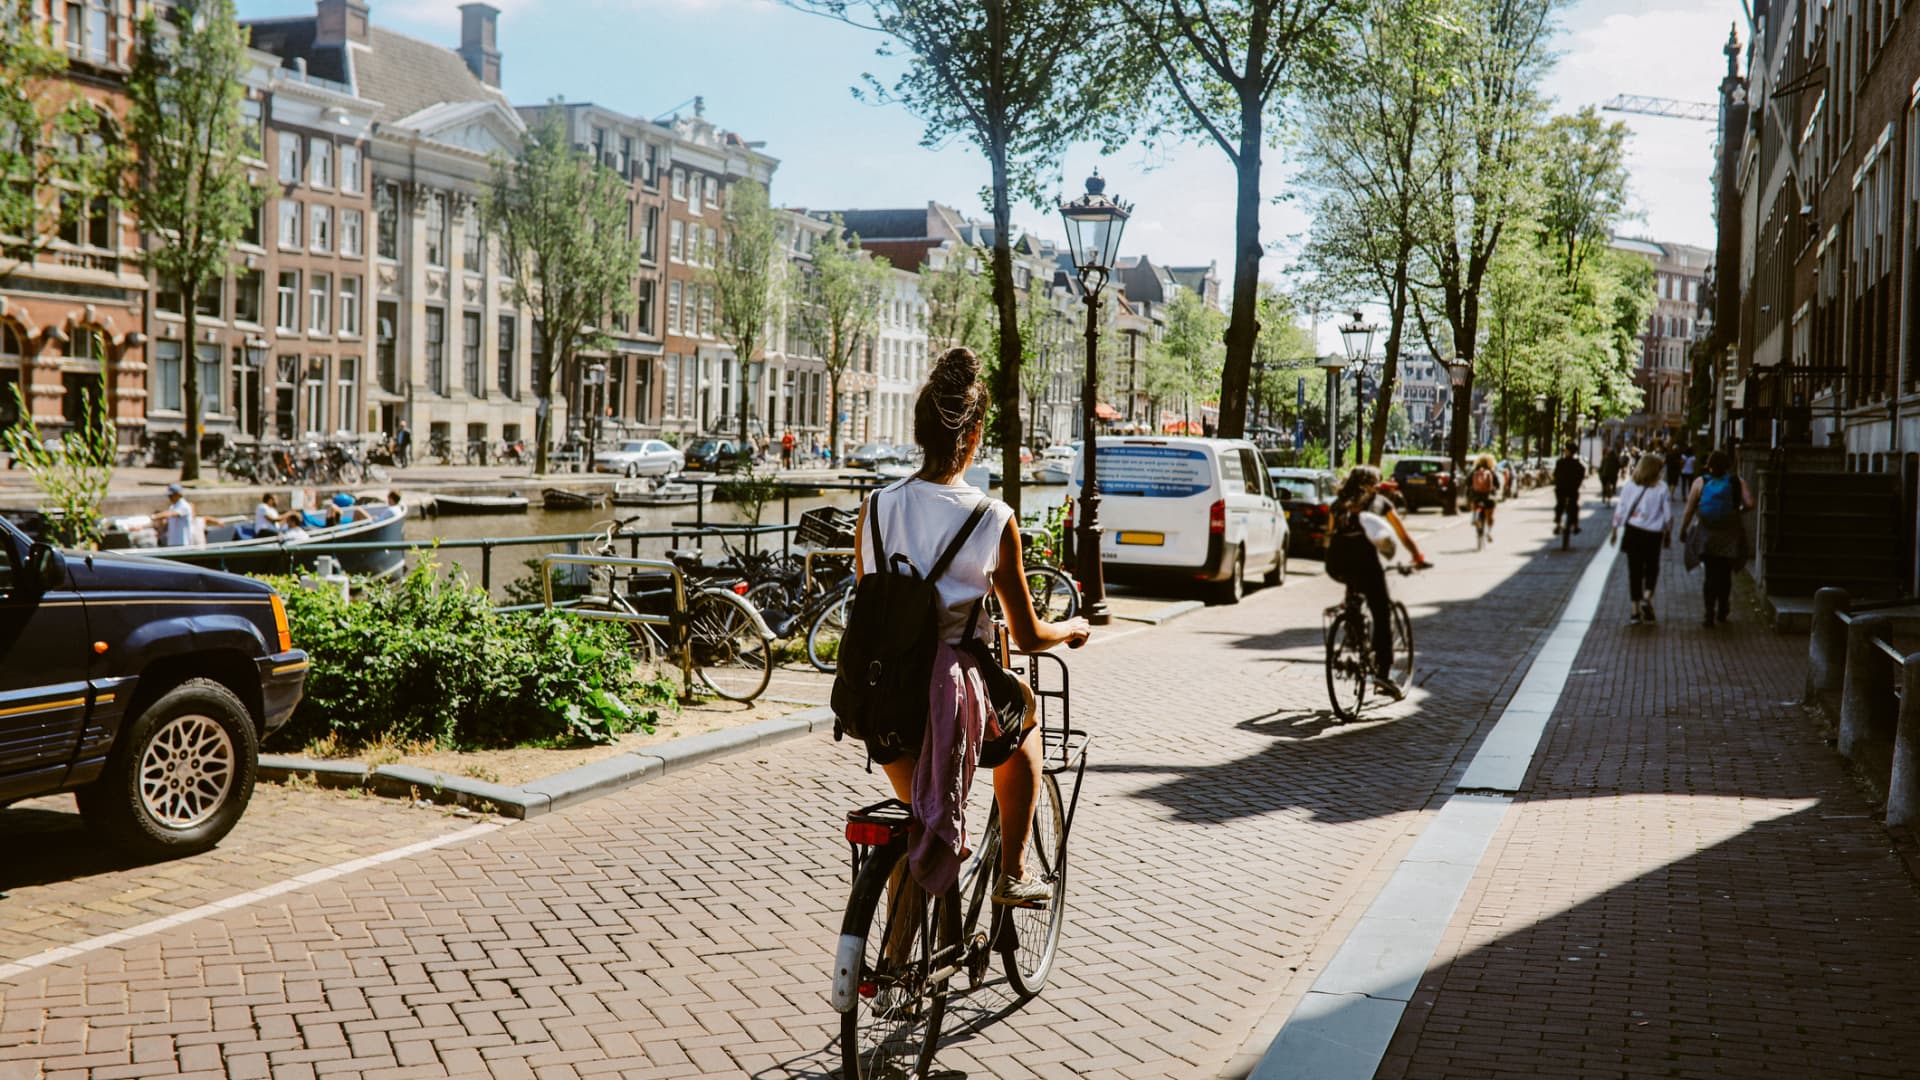 Amsterdam is one of the most bike-friendly cities in the world, with an extensive network of bike lanes.